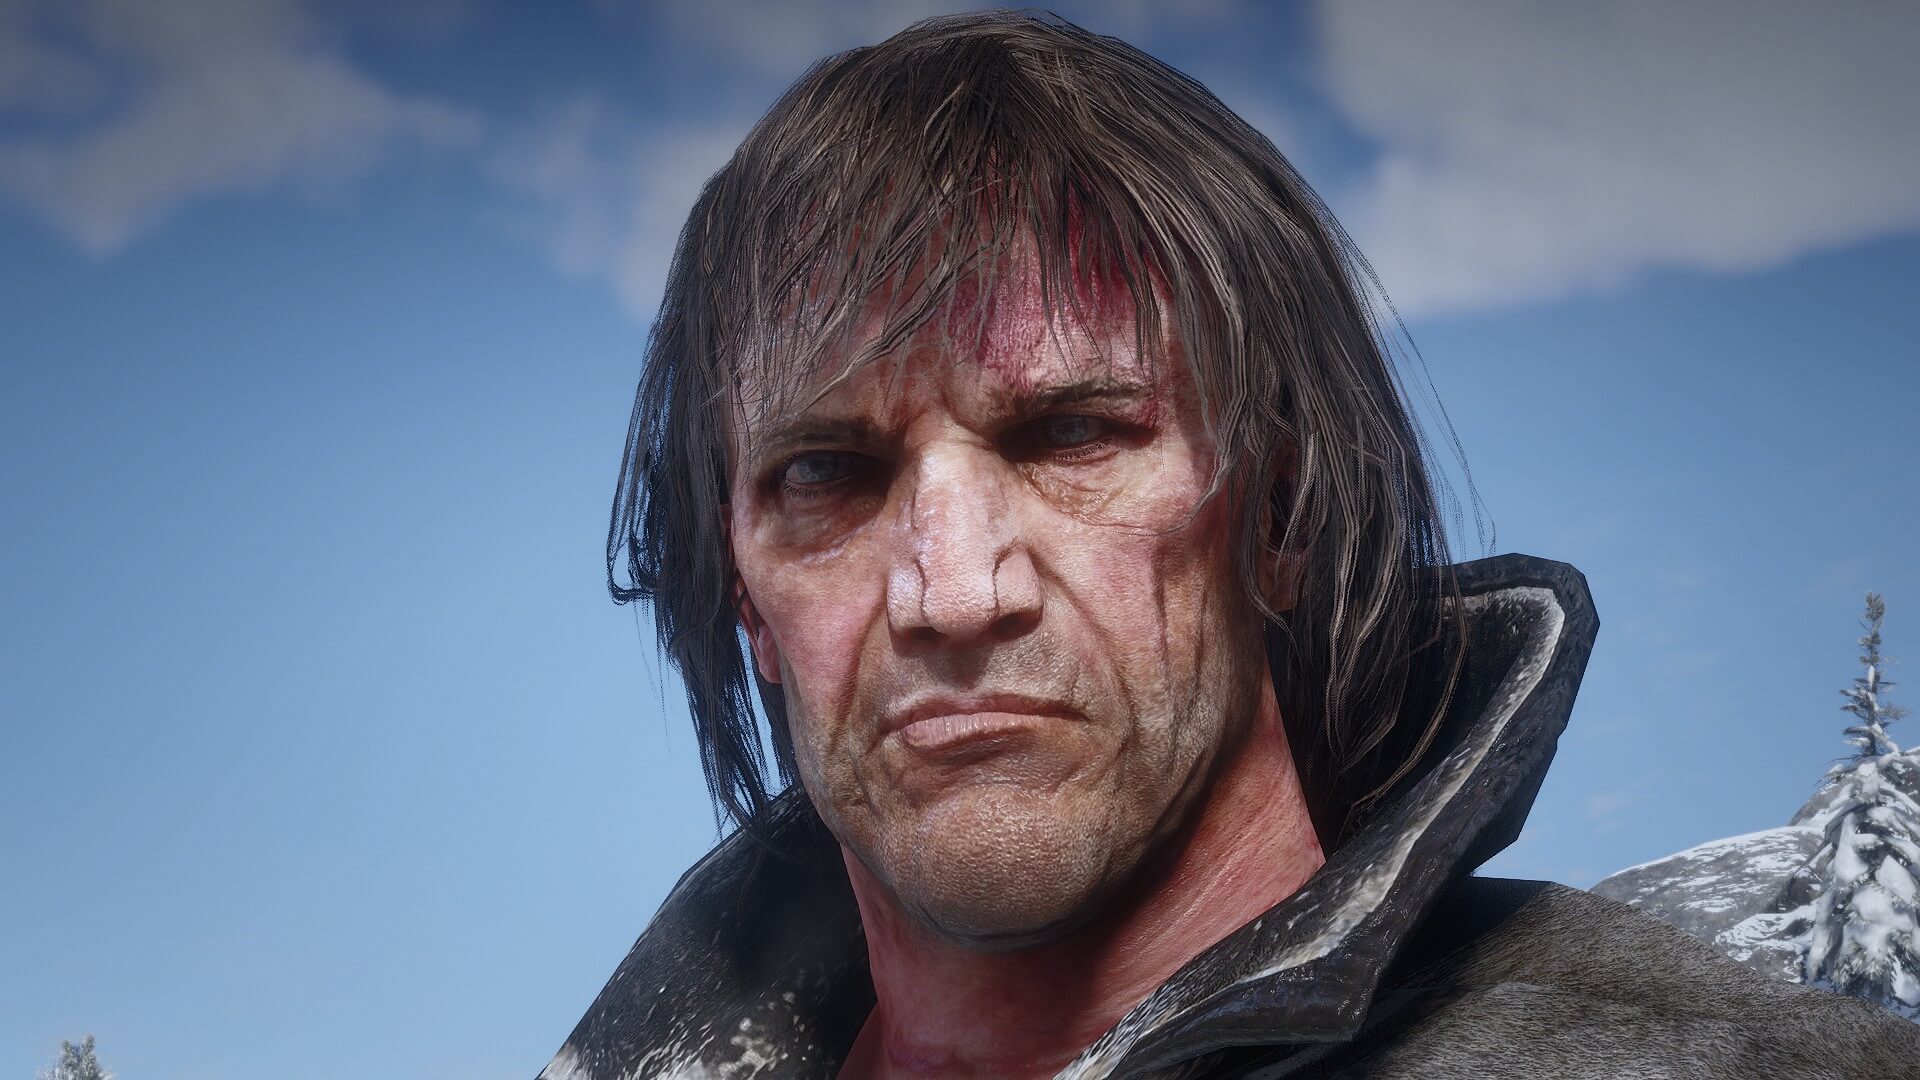 Bad hair graphics on PC in RDR2! Any suggestions? : r/reddeadredemption